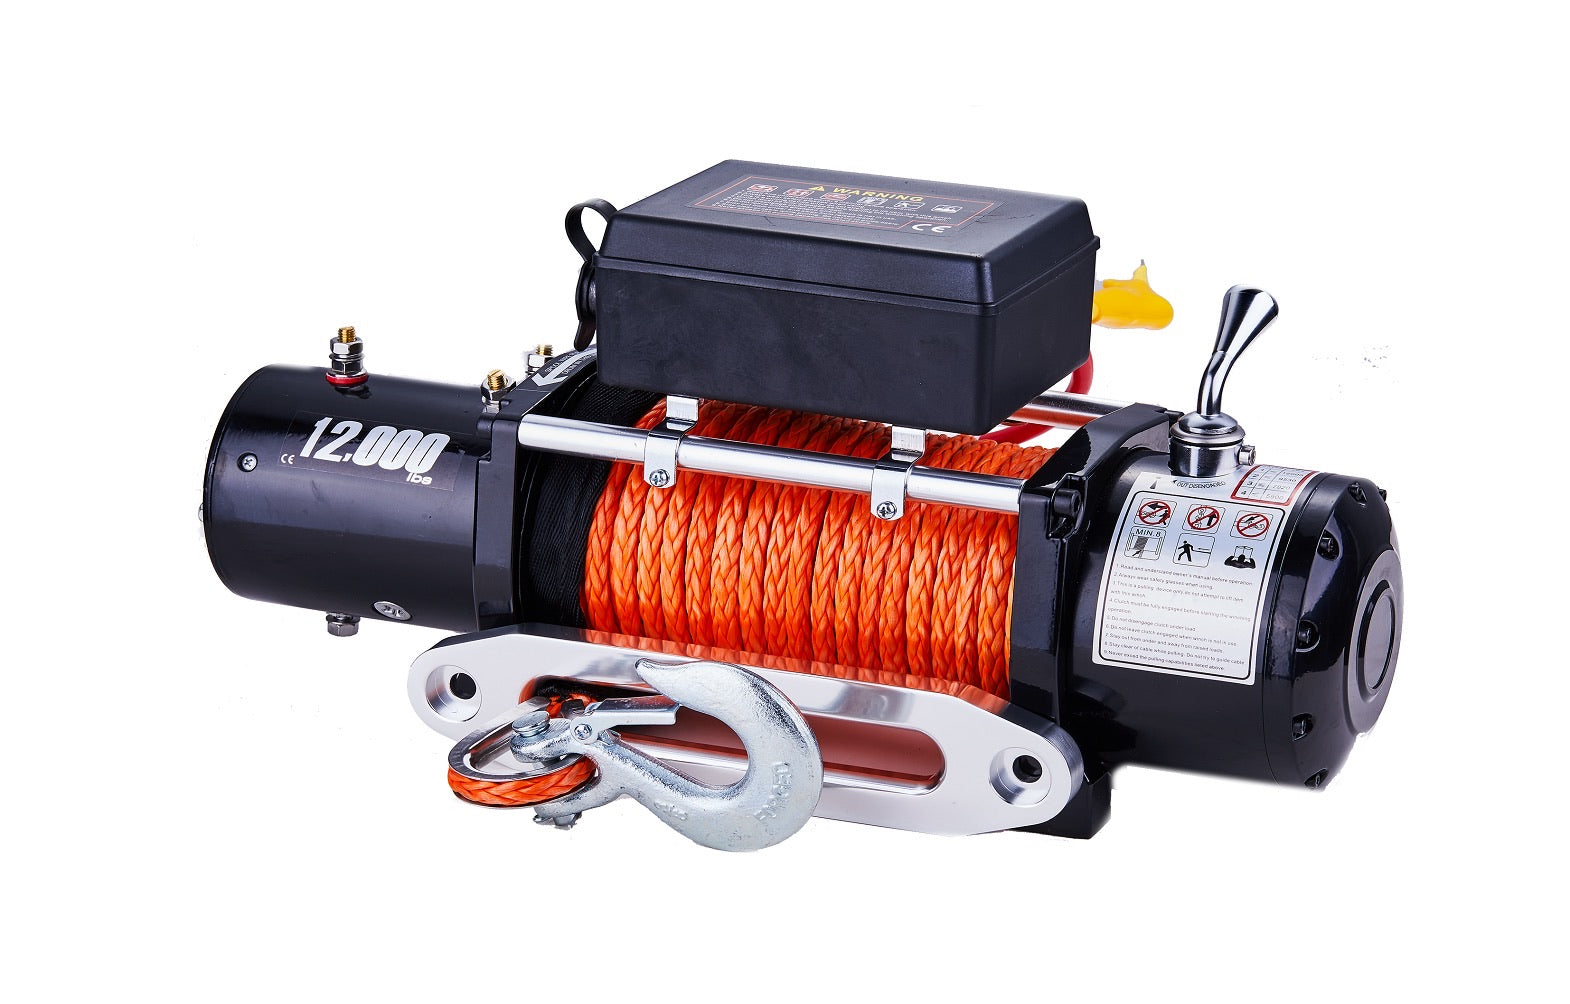 Overland 12,000 LB Synthetic Winch